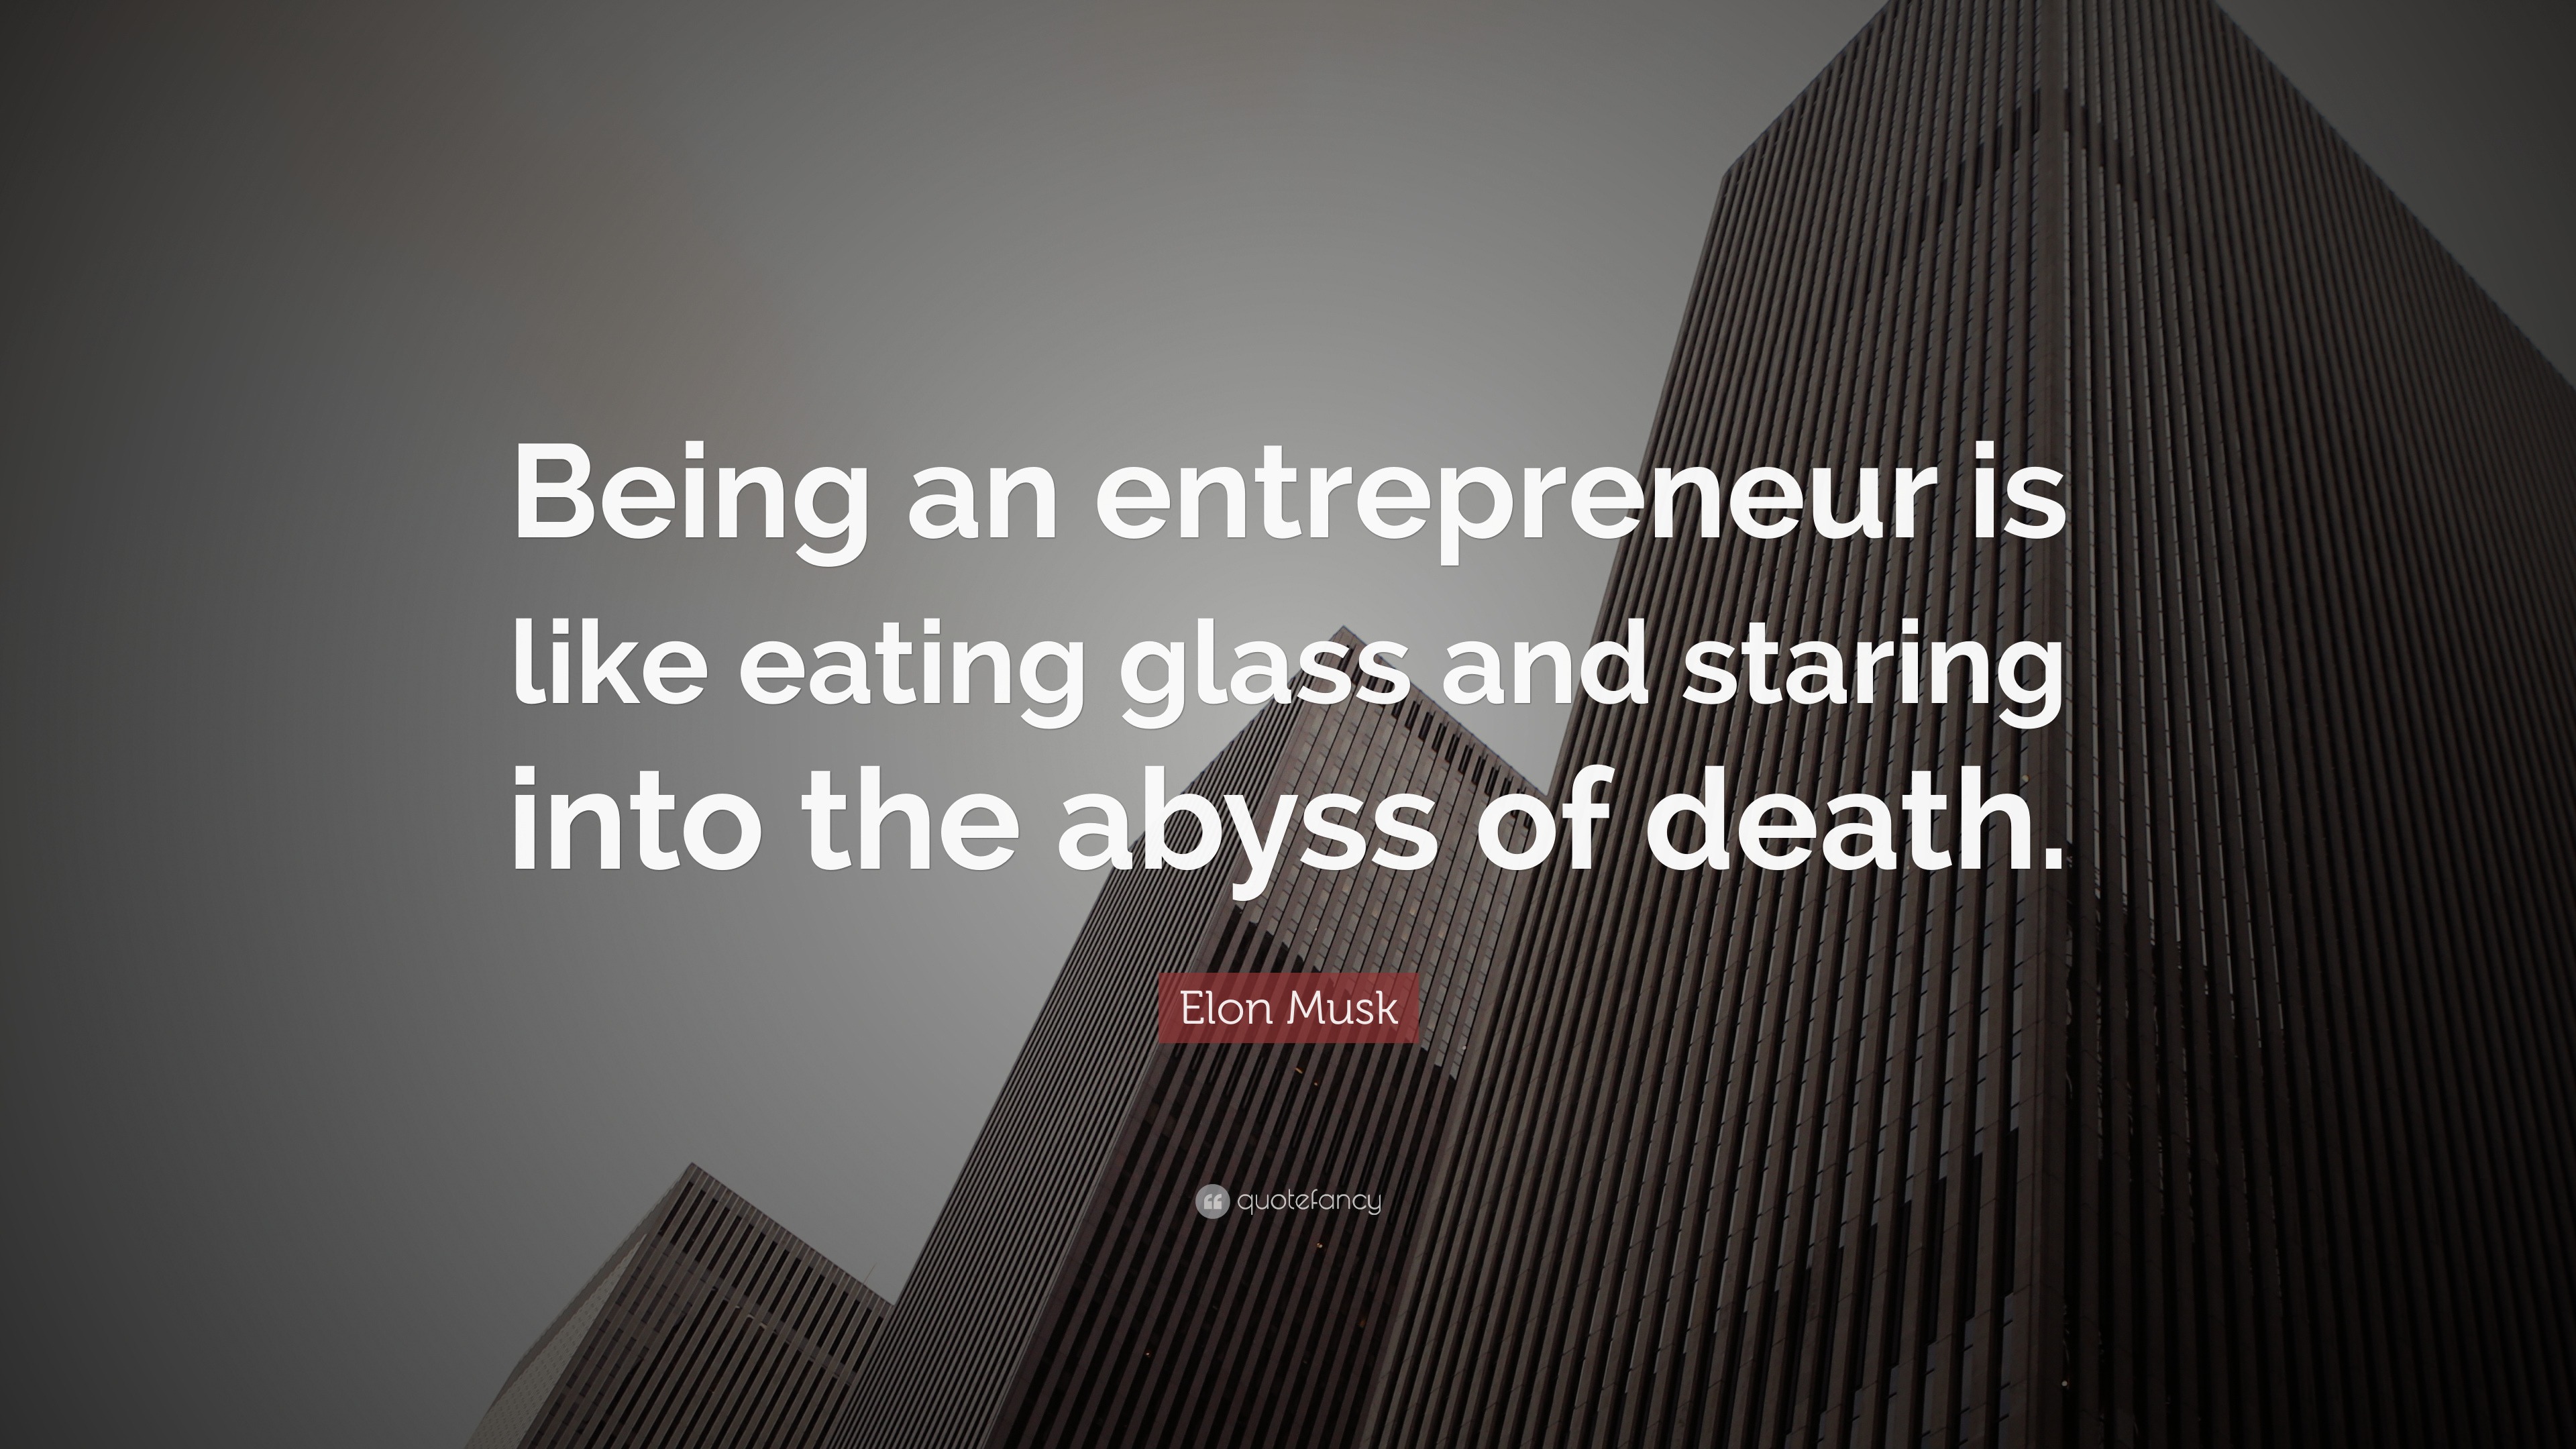 Elon Musk Quote: “Being an entrepreneur is like eating glass and